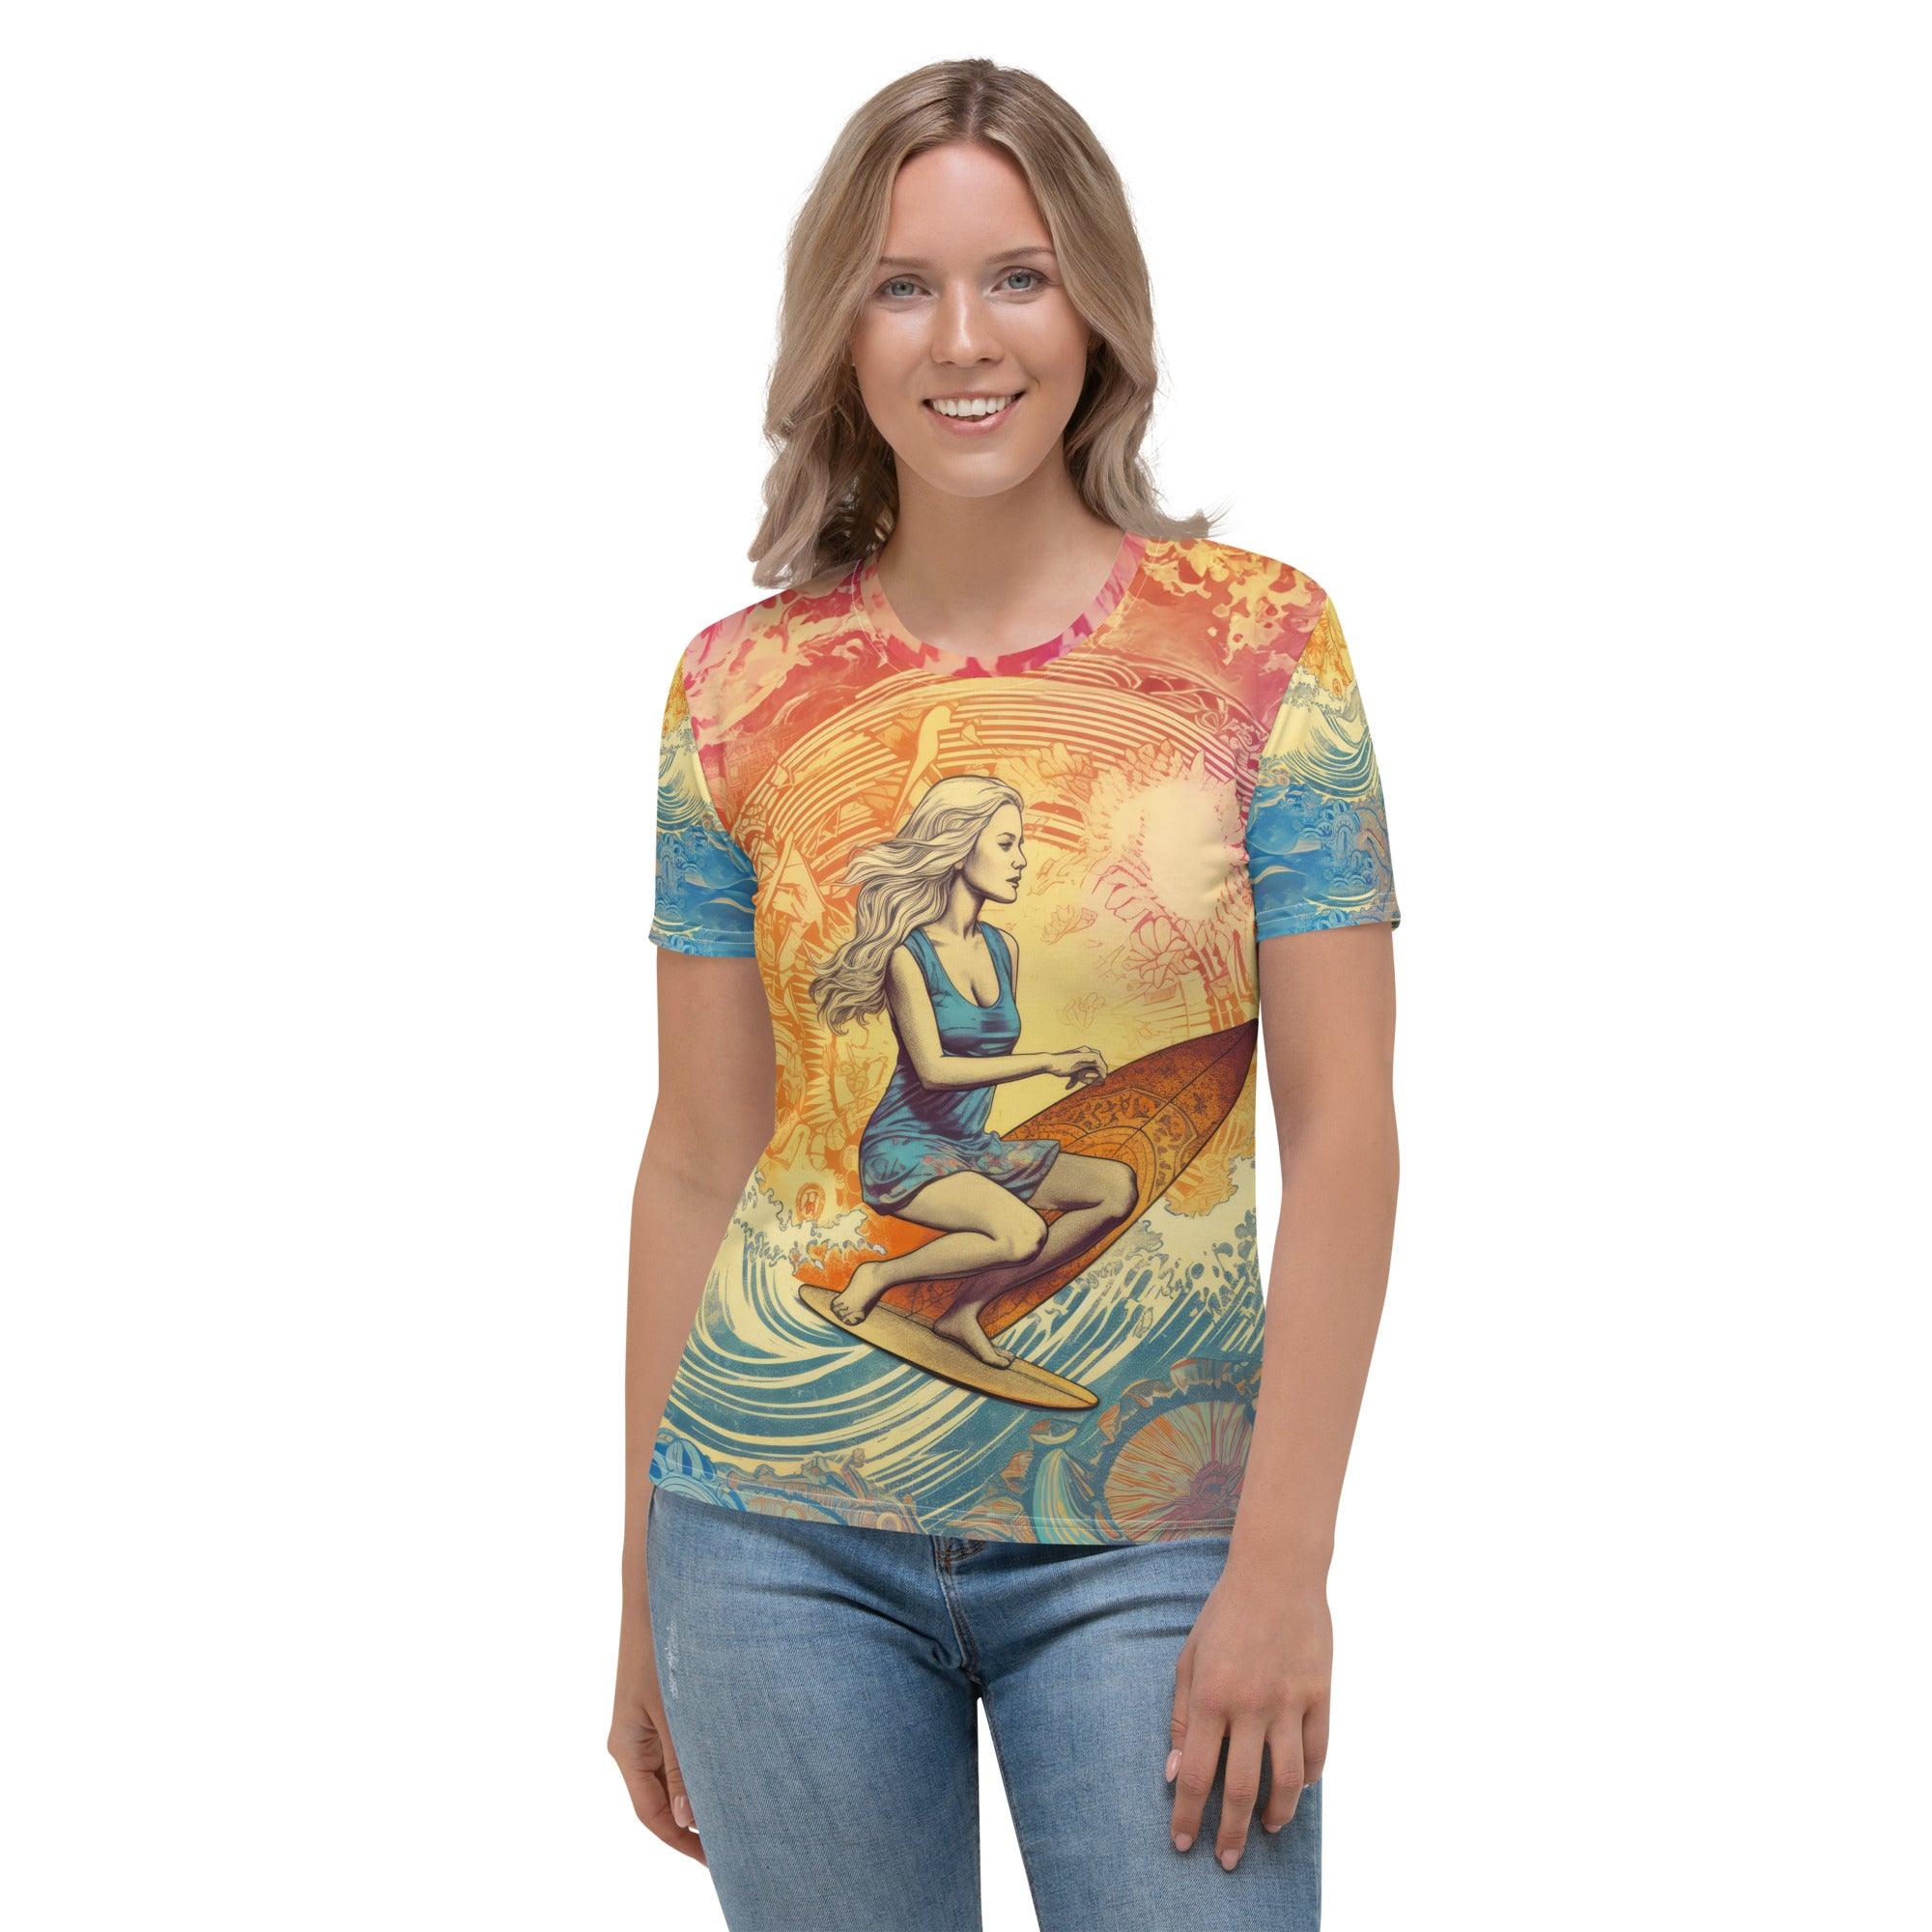 Catching Waves All-Over Print Women's Crew Neck T-Shirt - Beyond T-shirts